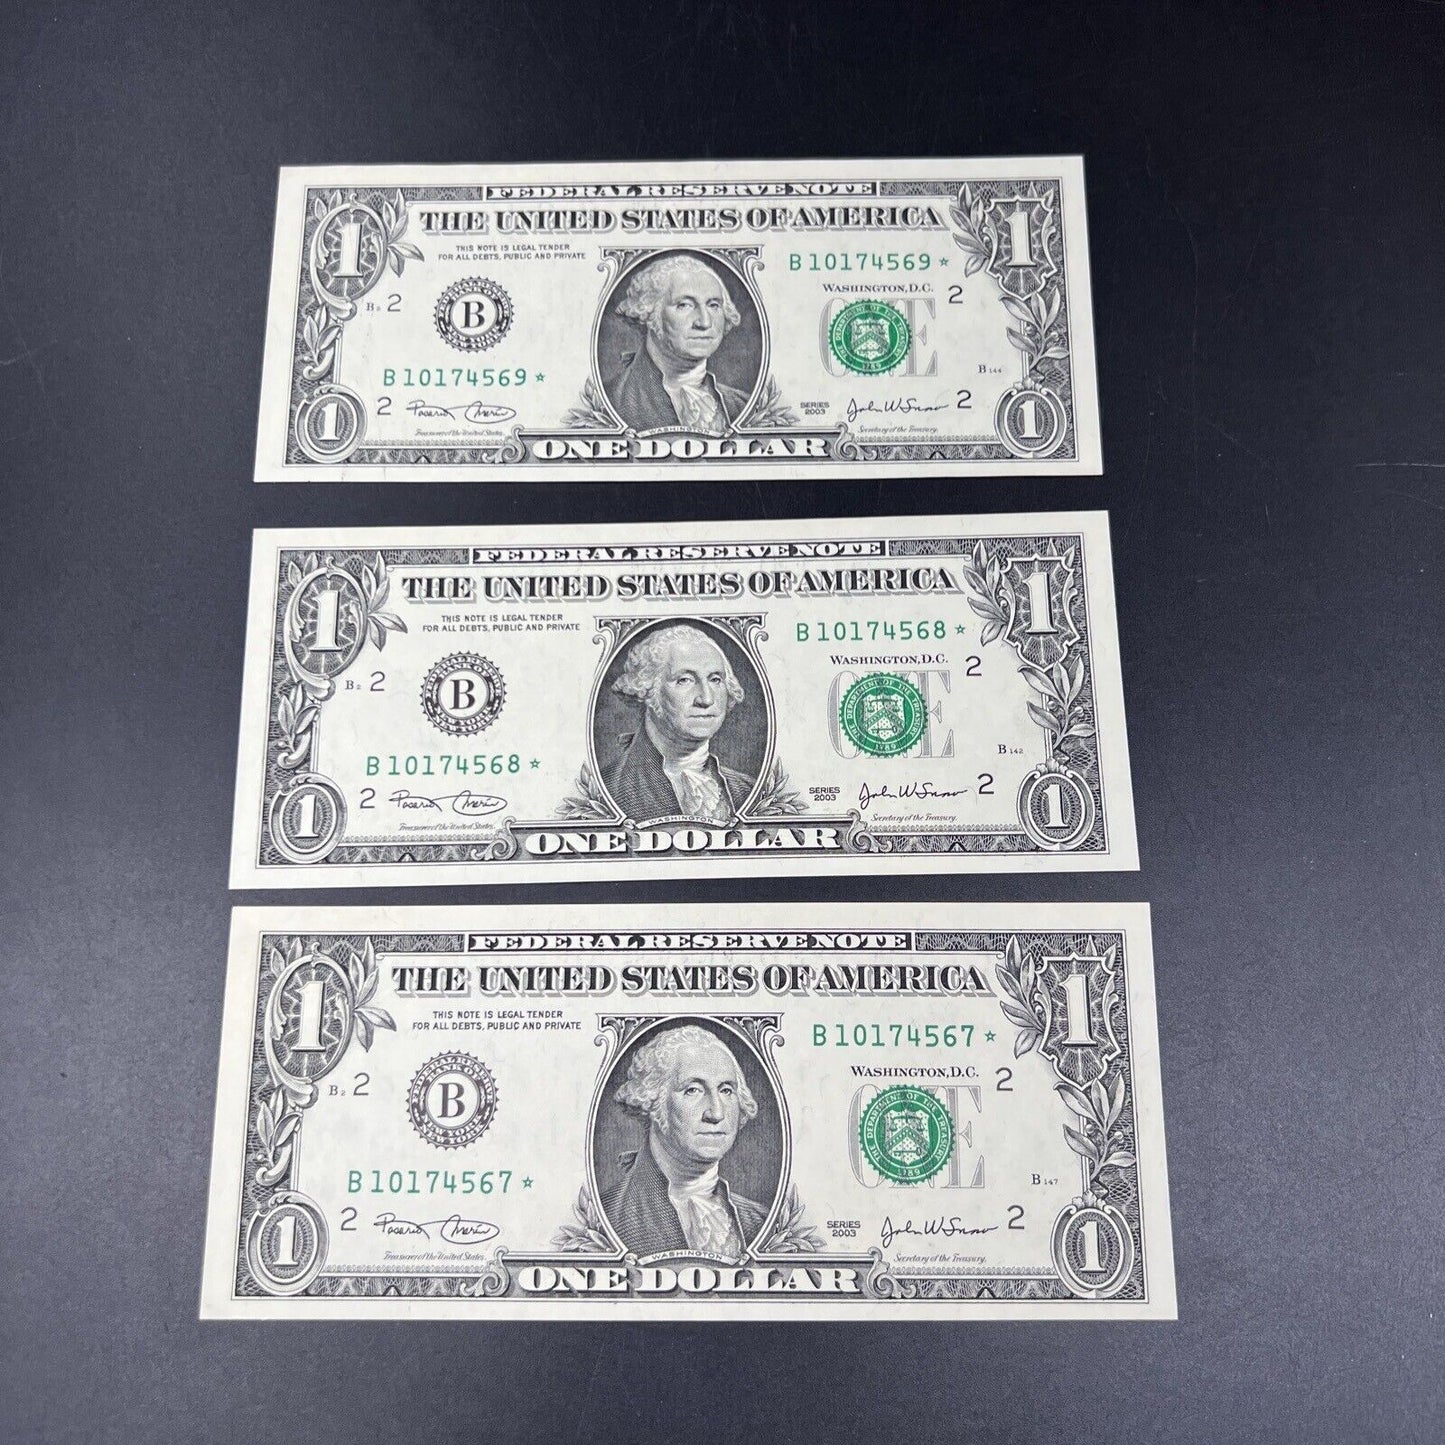 3 Consecutive 2003 * Star Notes $1 FRN Federal Reserve Note Dollar Bill CH UNC